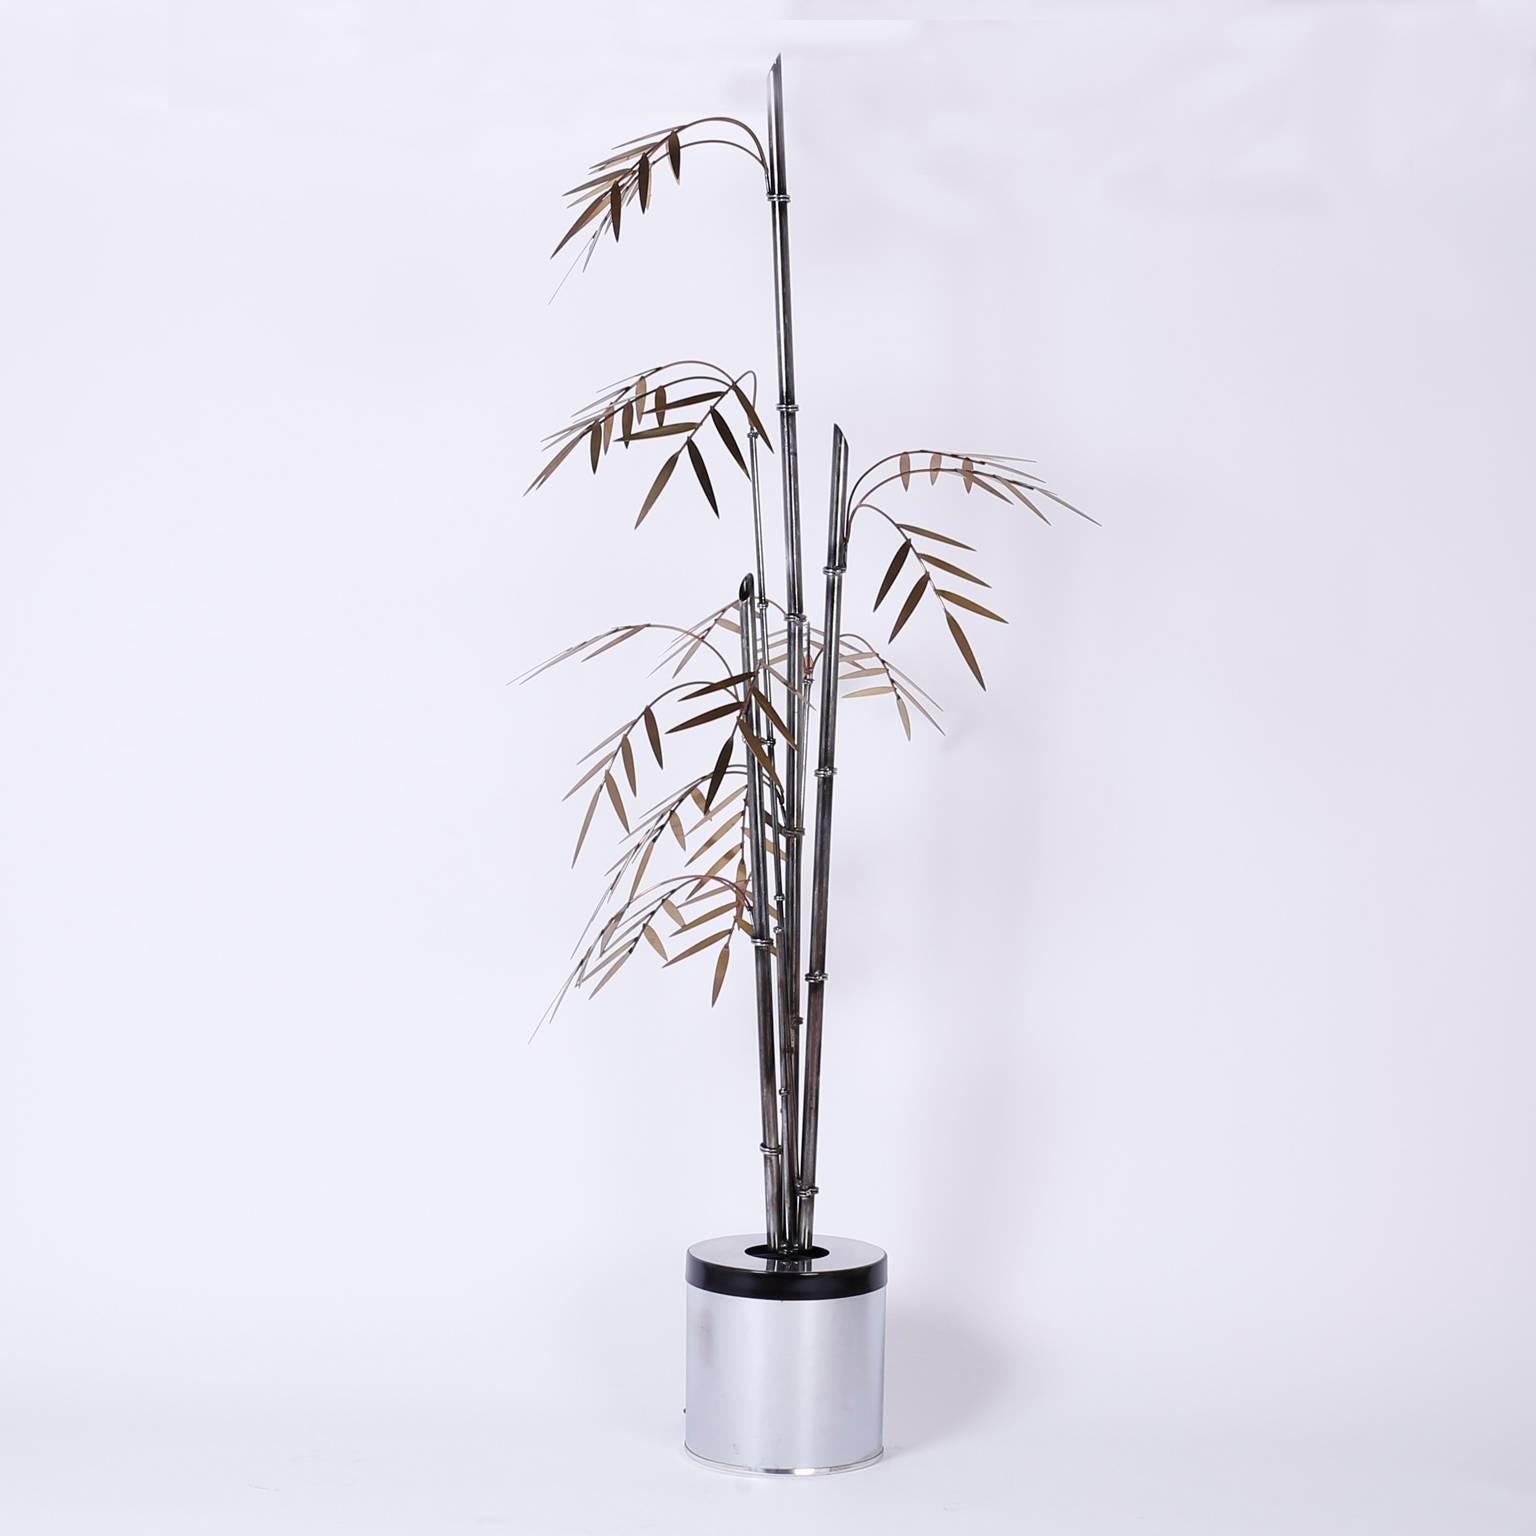 Chic, tropical palm style bamboo sculpture crafted with iron bamboo shoots in varying stages of development and copper and brass stylized branches and leaves. The canister base has a one bulb socket that can create subtle mood lighting.